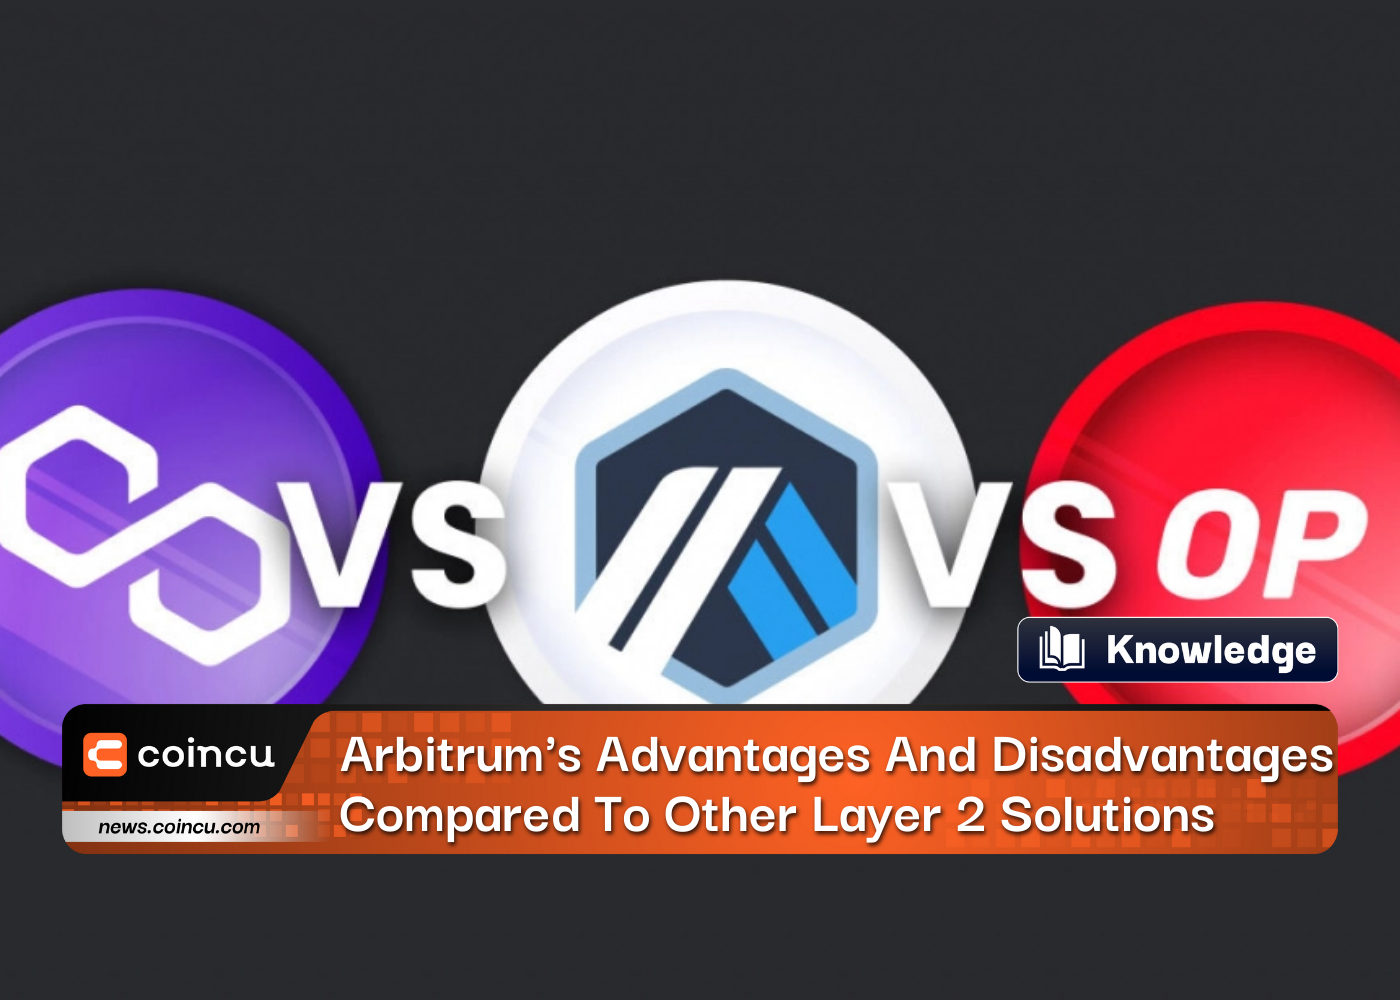 Arbitrum's Advantages And Disadvantages Compared To Other Layer 2 Solutions